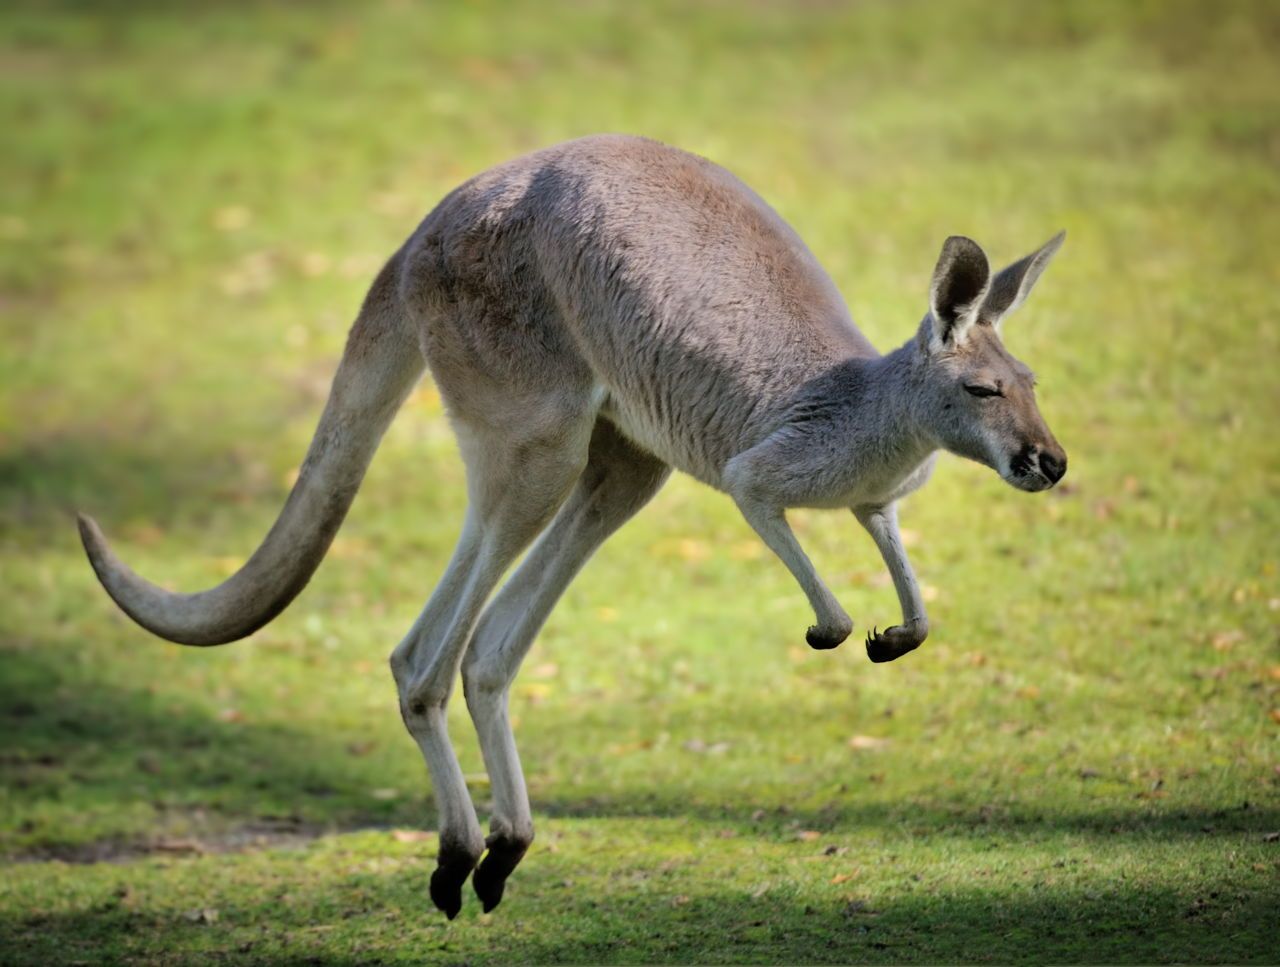 why do kangaroos hop instead of walking or running and how fast can they hop